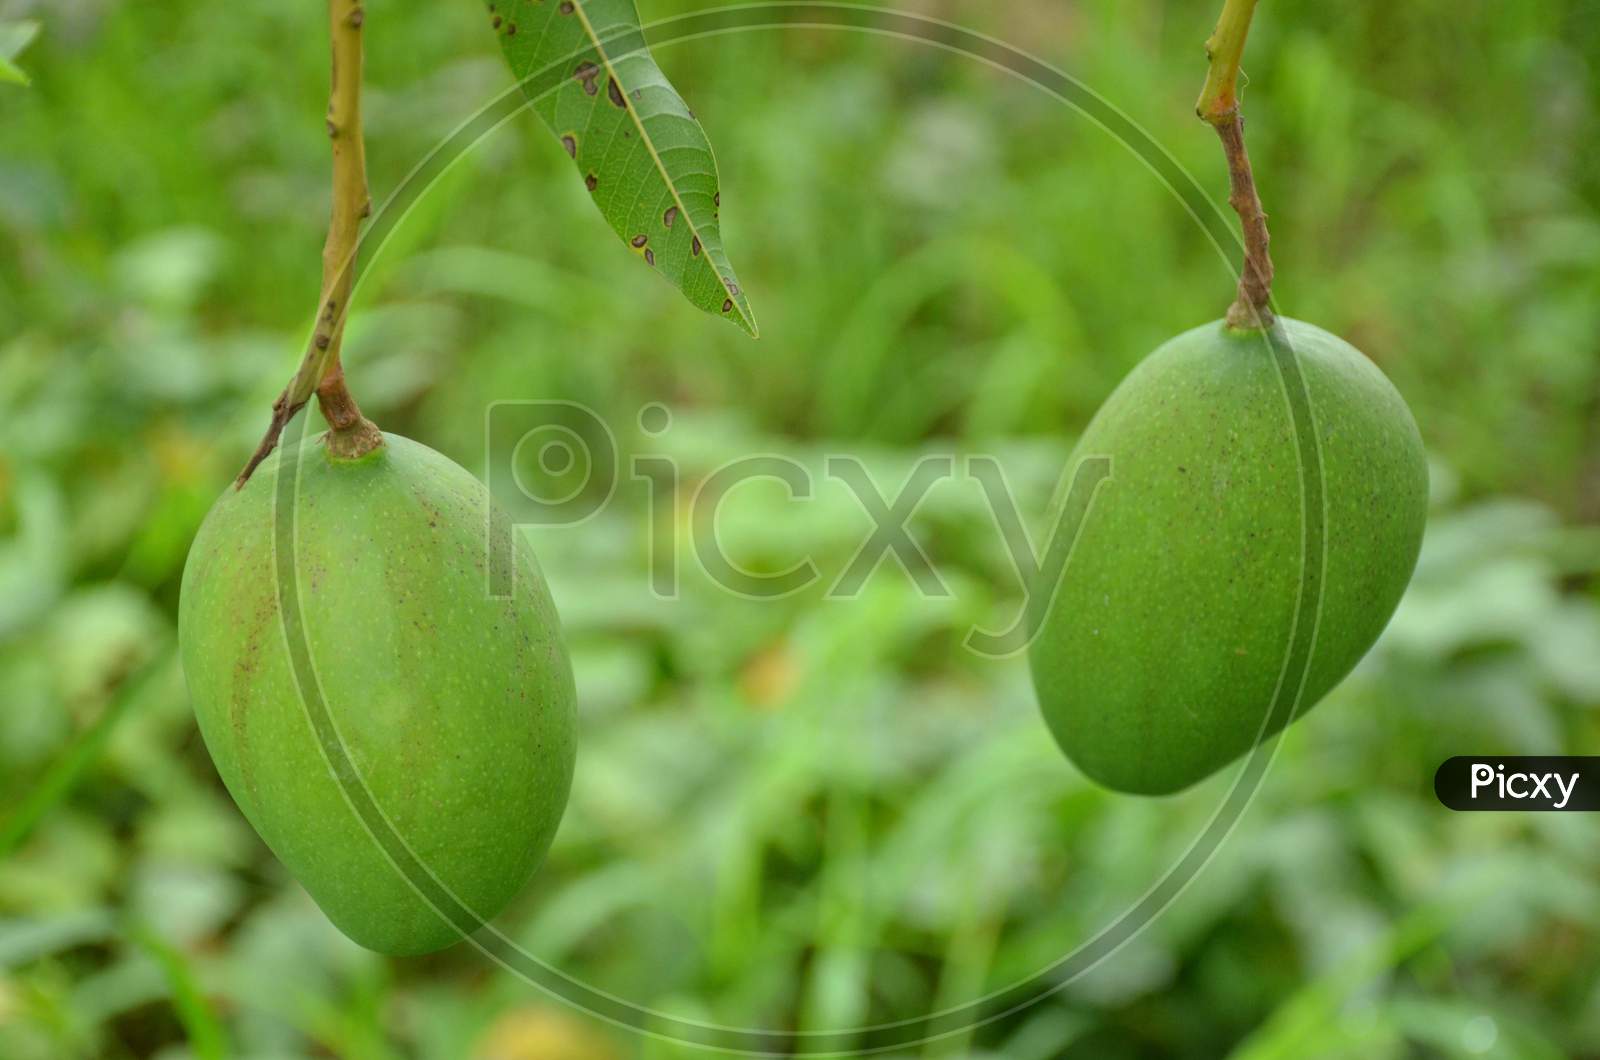 the pair of ripe green mango with leaves and branch in the garden.